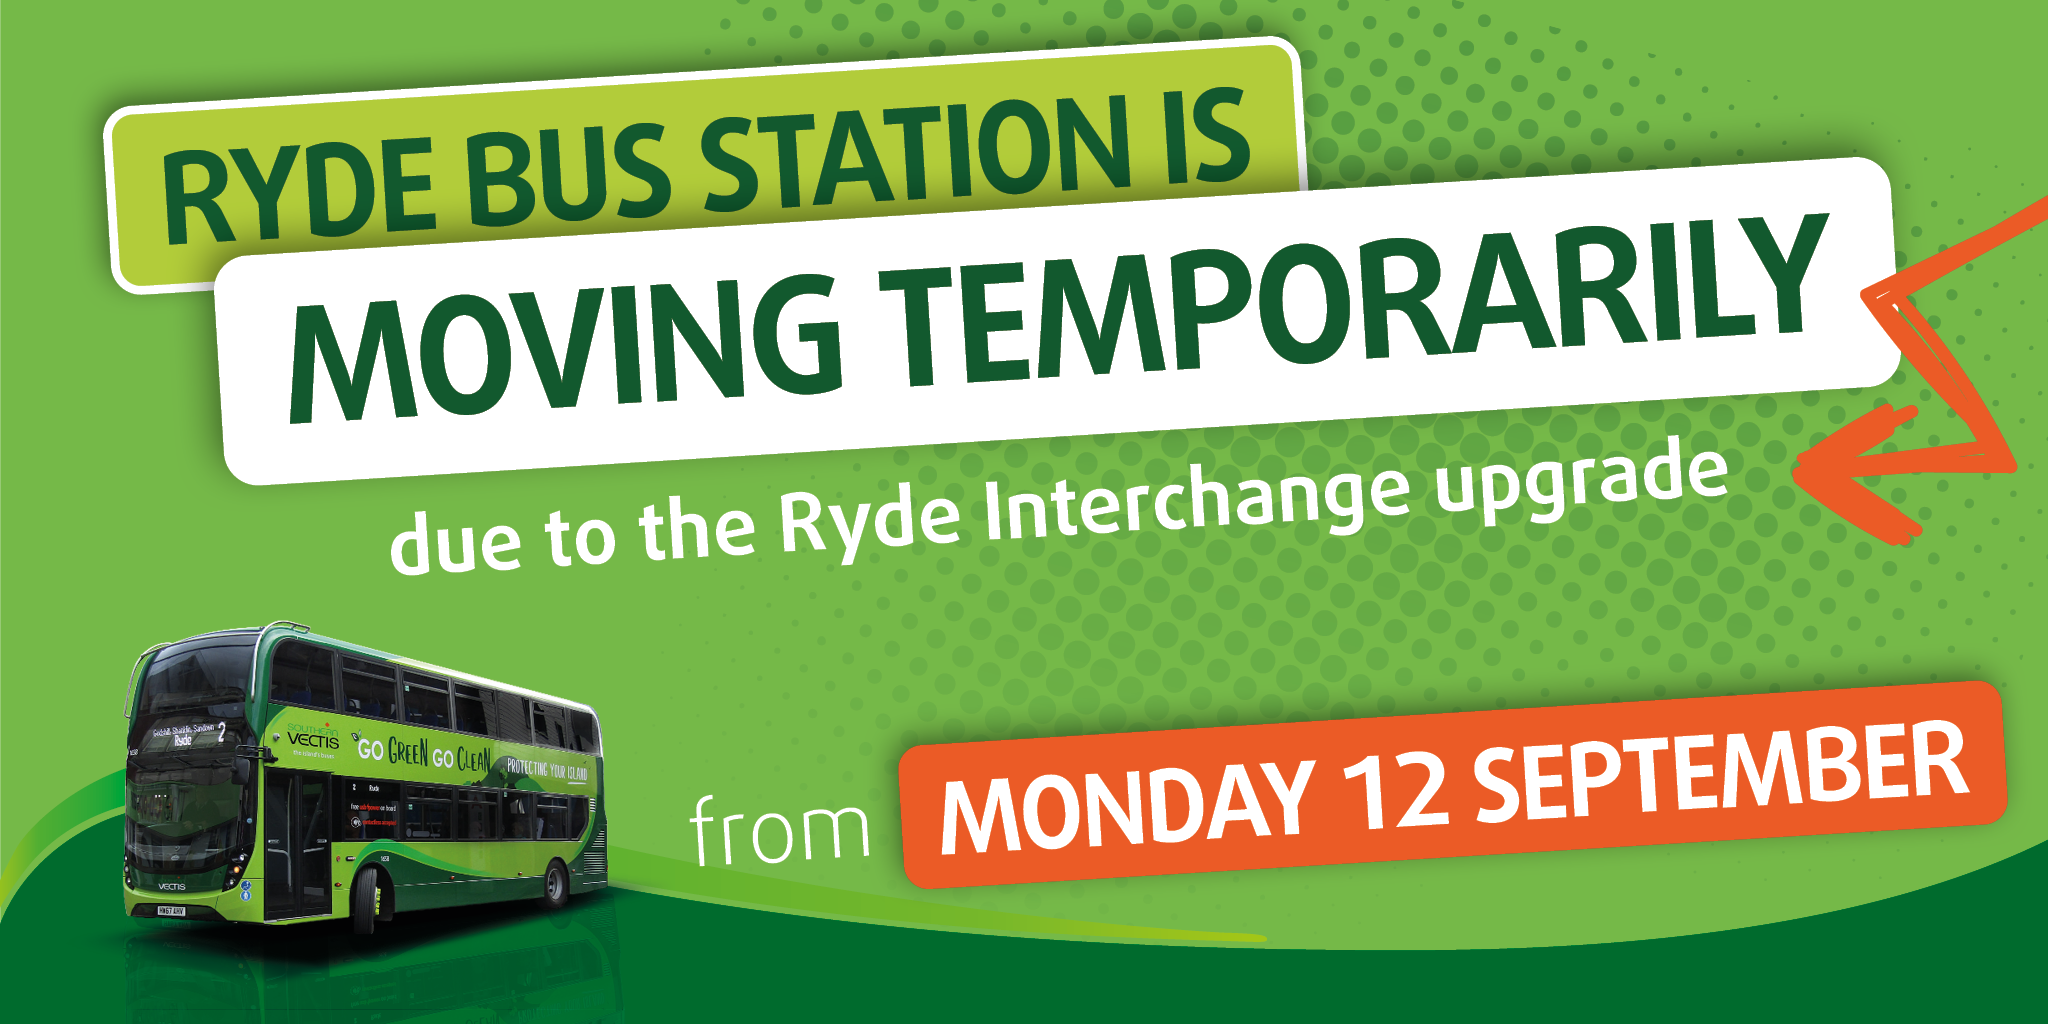 ryde bus station is moving temporarily from 12th september